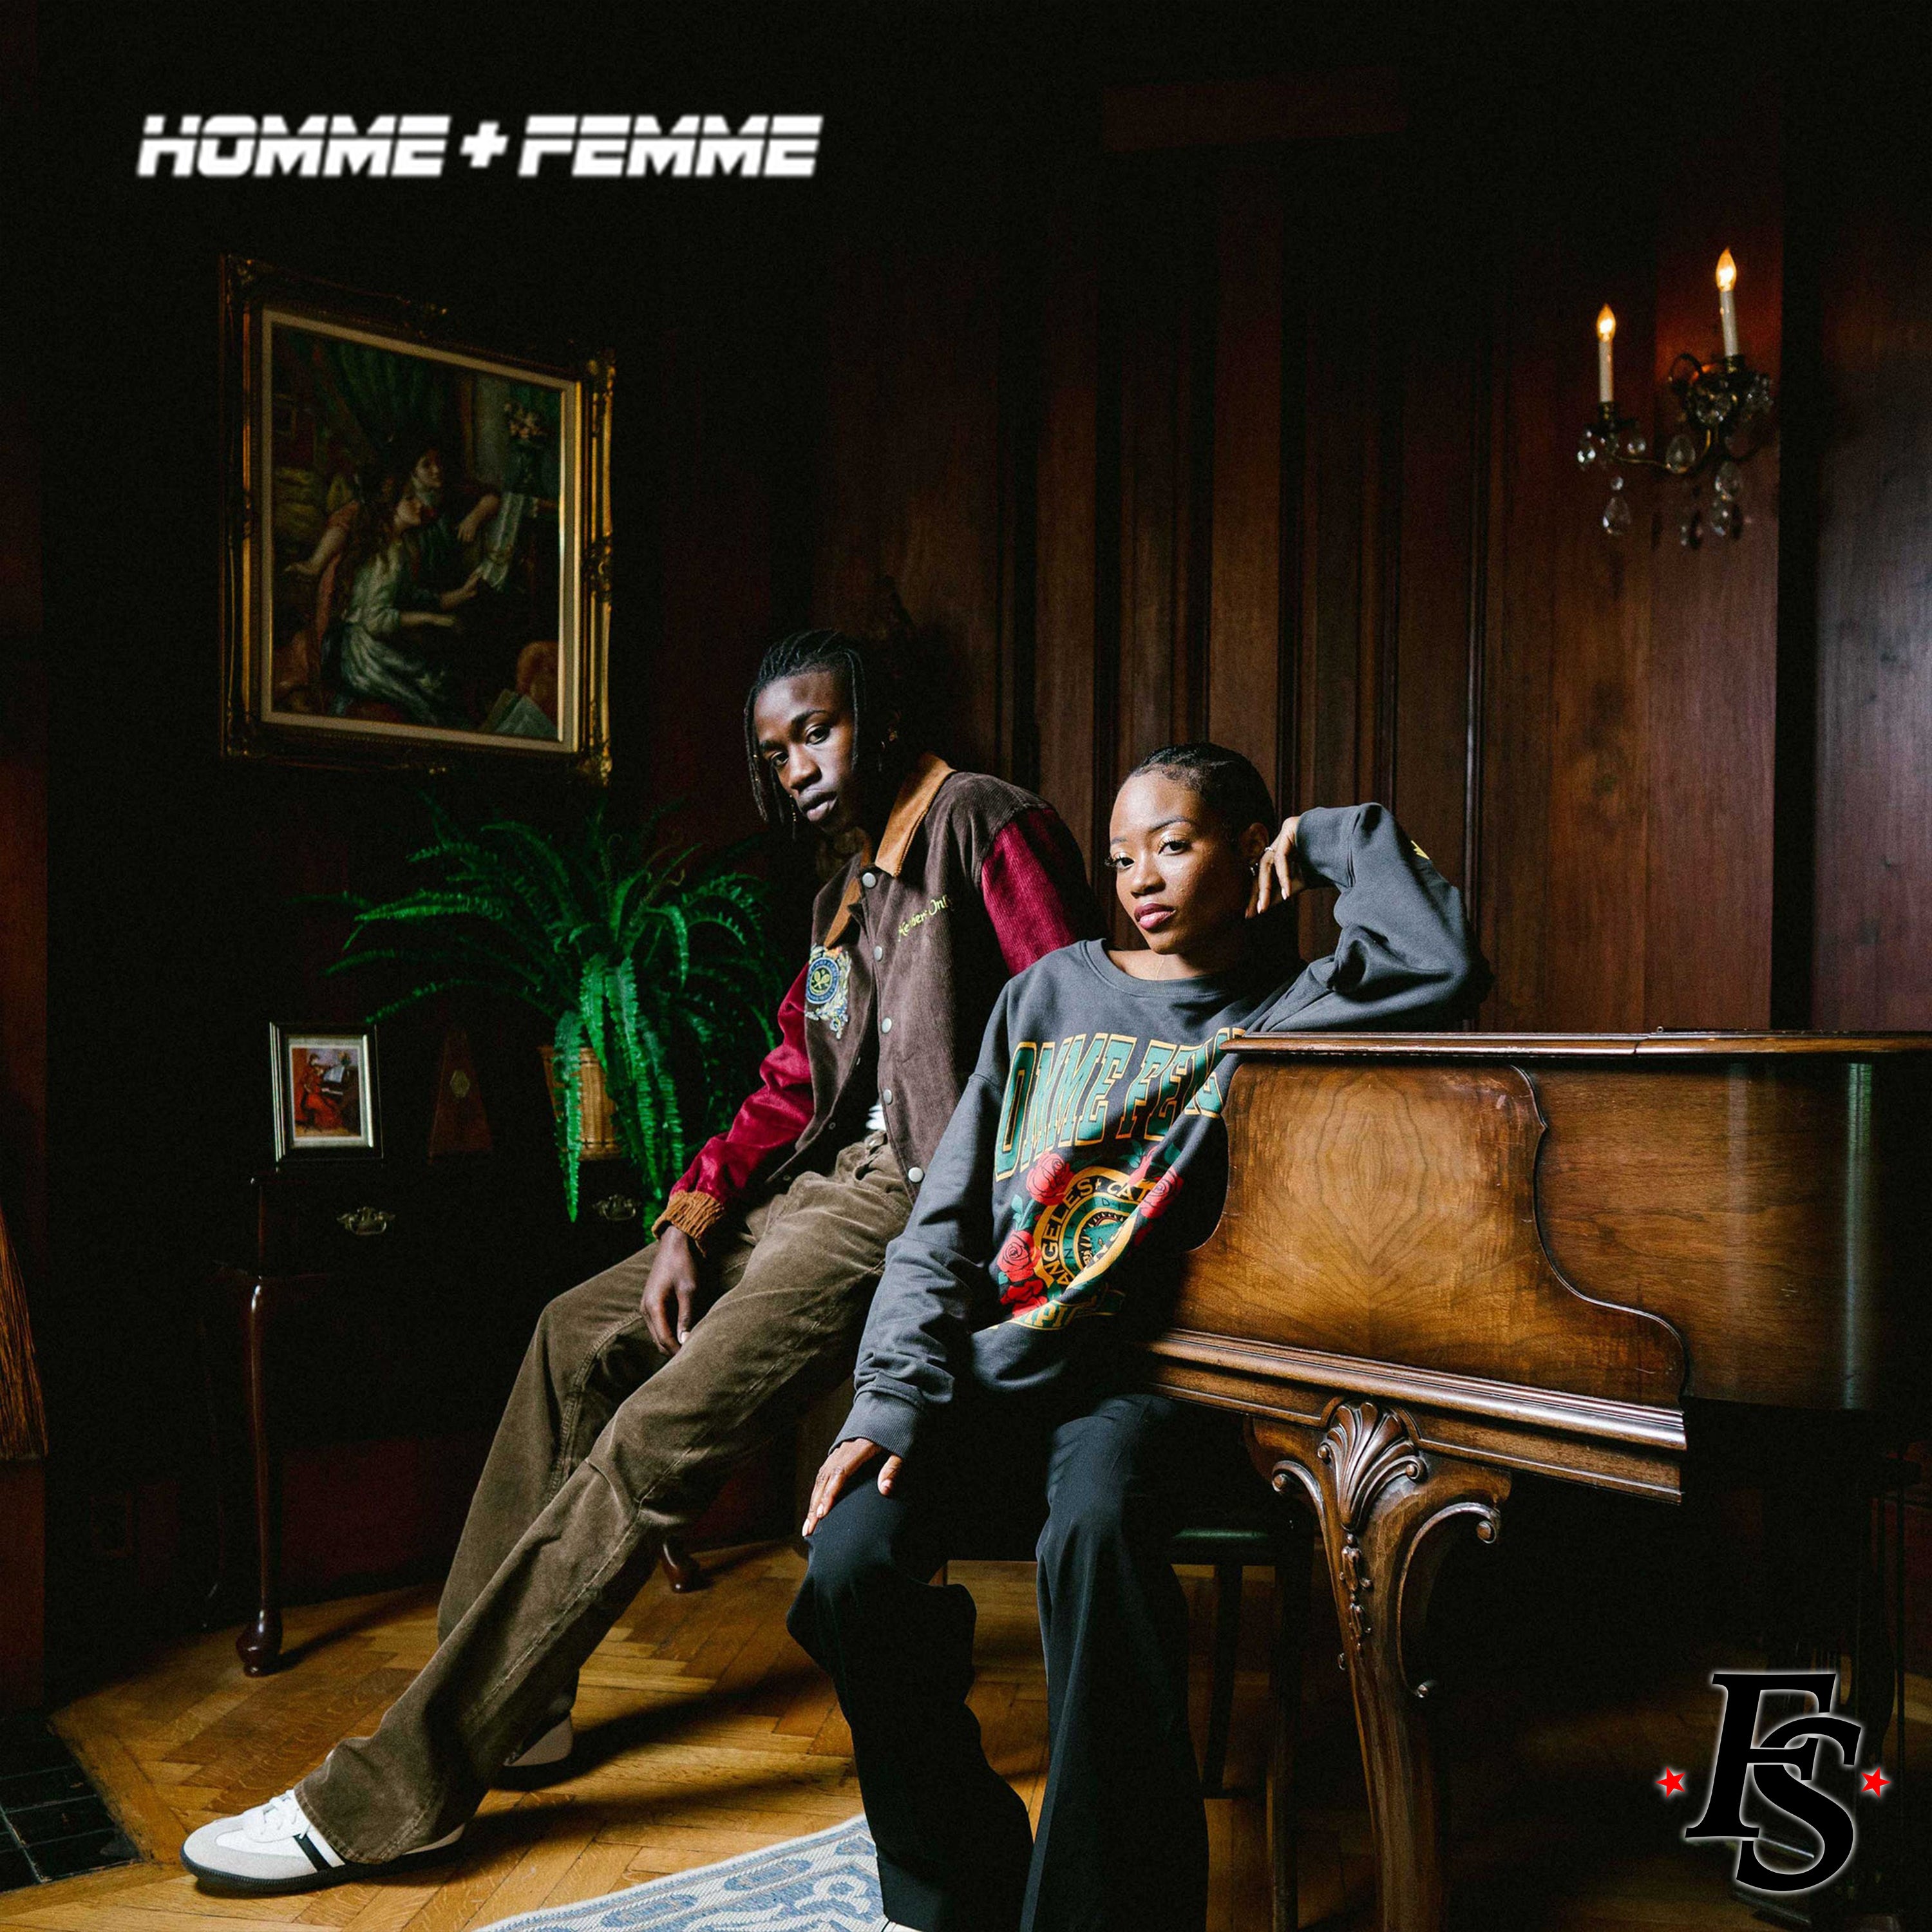 Homme + Femme – tagged 